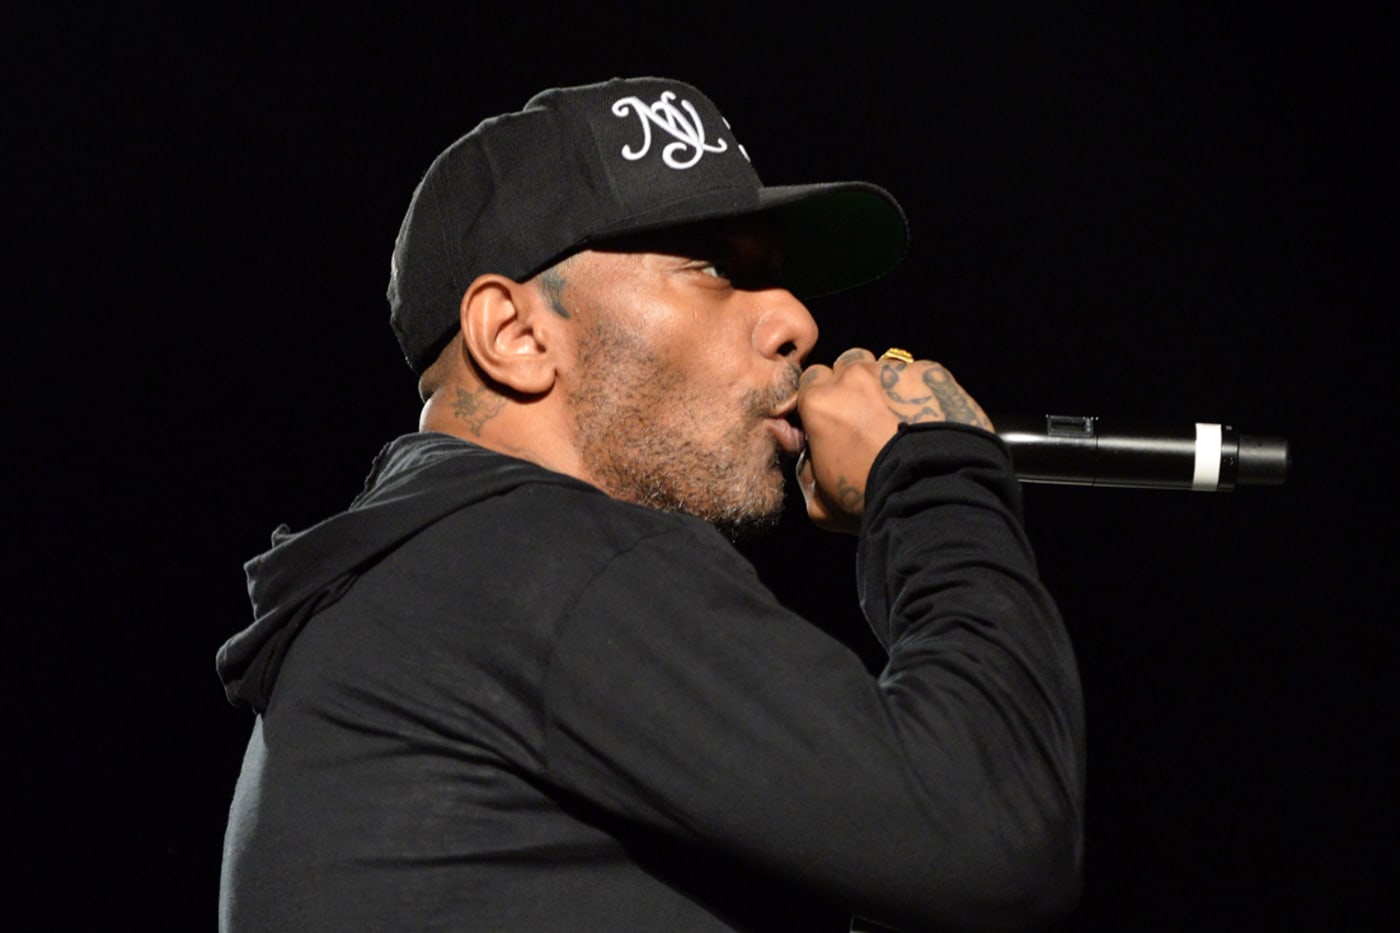 Prodigy of Mobb Deep performing